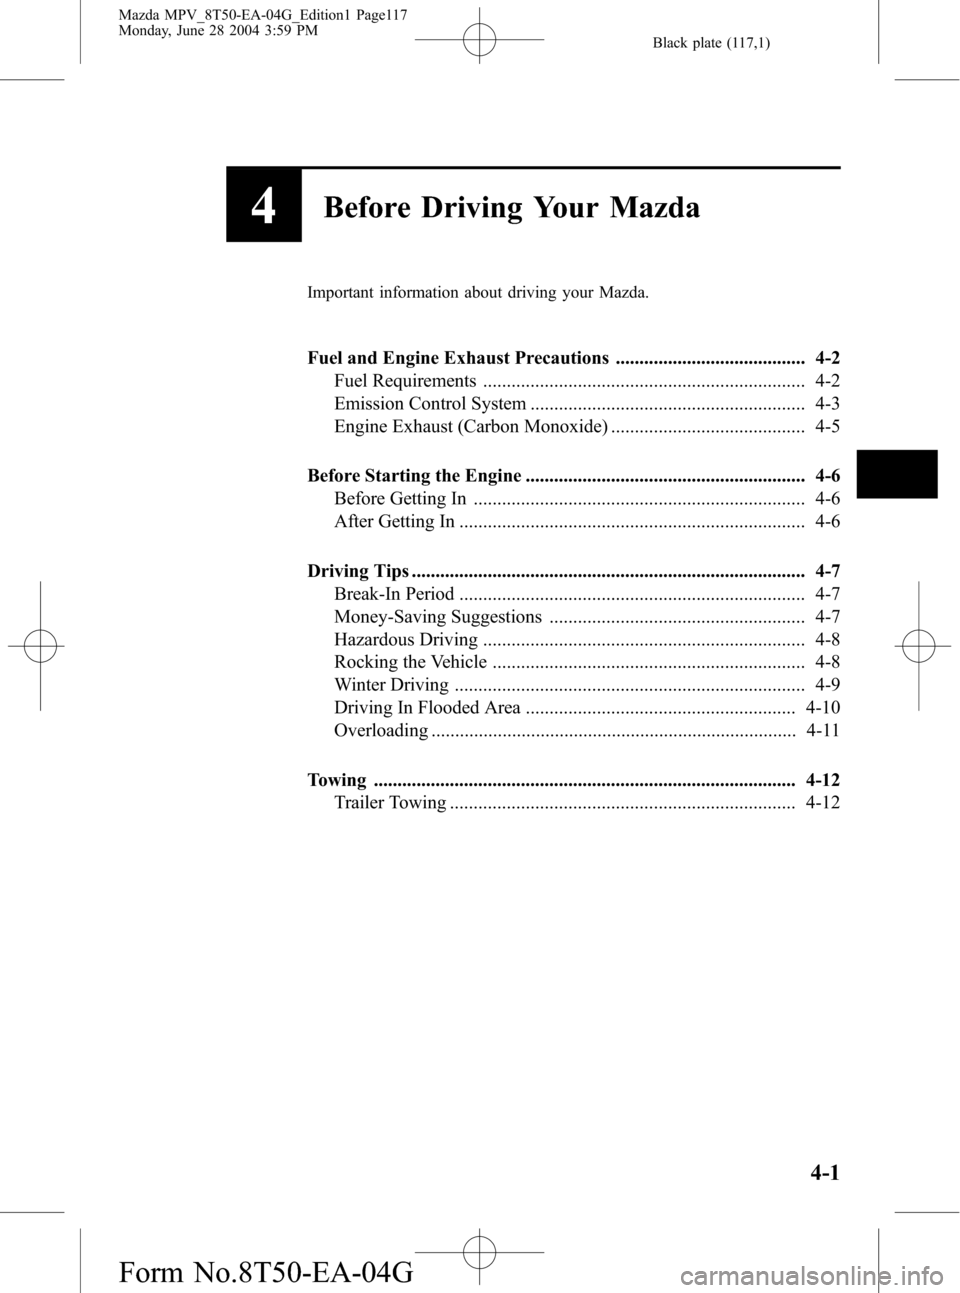 MAZDA MODEL MPV 2005  Owners Manual (in English) Black plate (117,1)
4Before Driving Your Mazda
Important information about driving your Mazda.
Fuel and Engine Exhaust Precautions ........................................ 4-2
Fuel Requirements ......